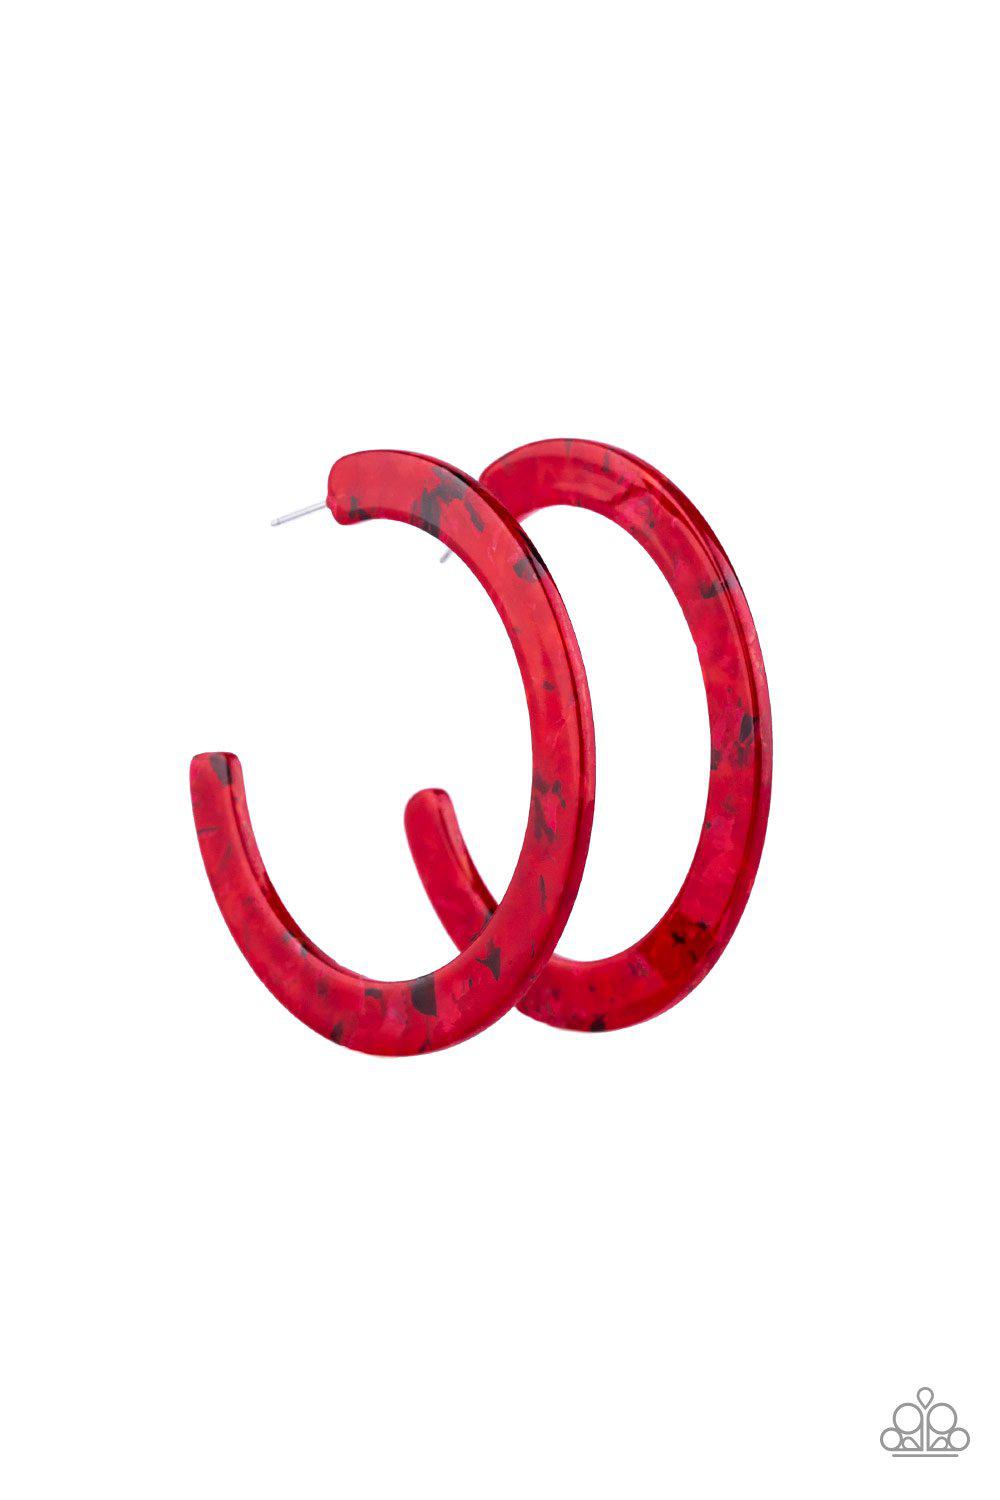 Haute Tamale Red Acrylic Hoop Earrings - Paparazzi Accessories-CarasShop.com - $5 Jewelry by Cara Jewels